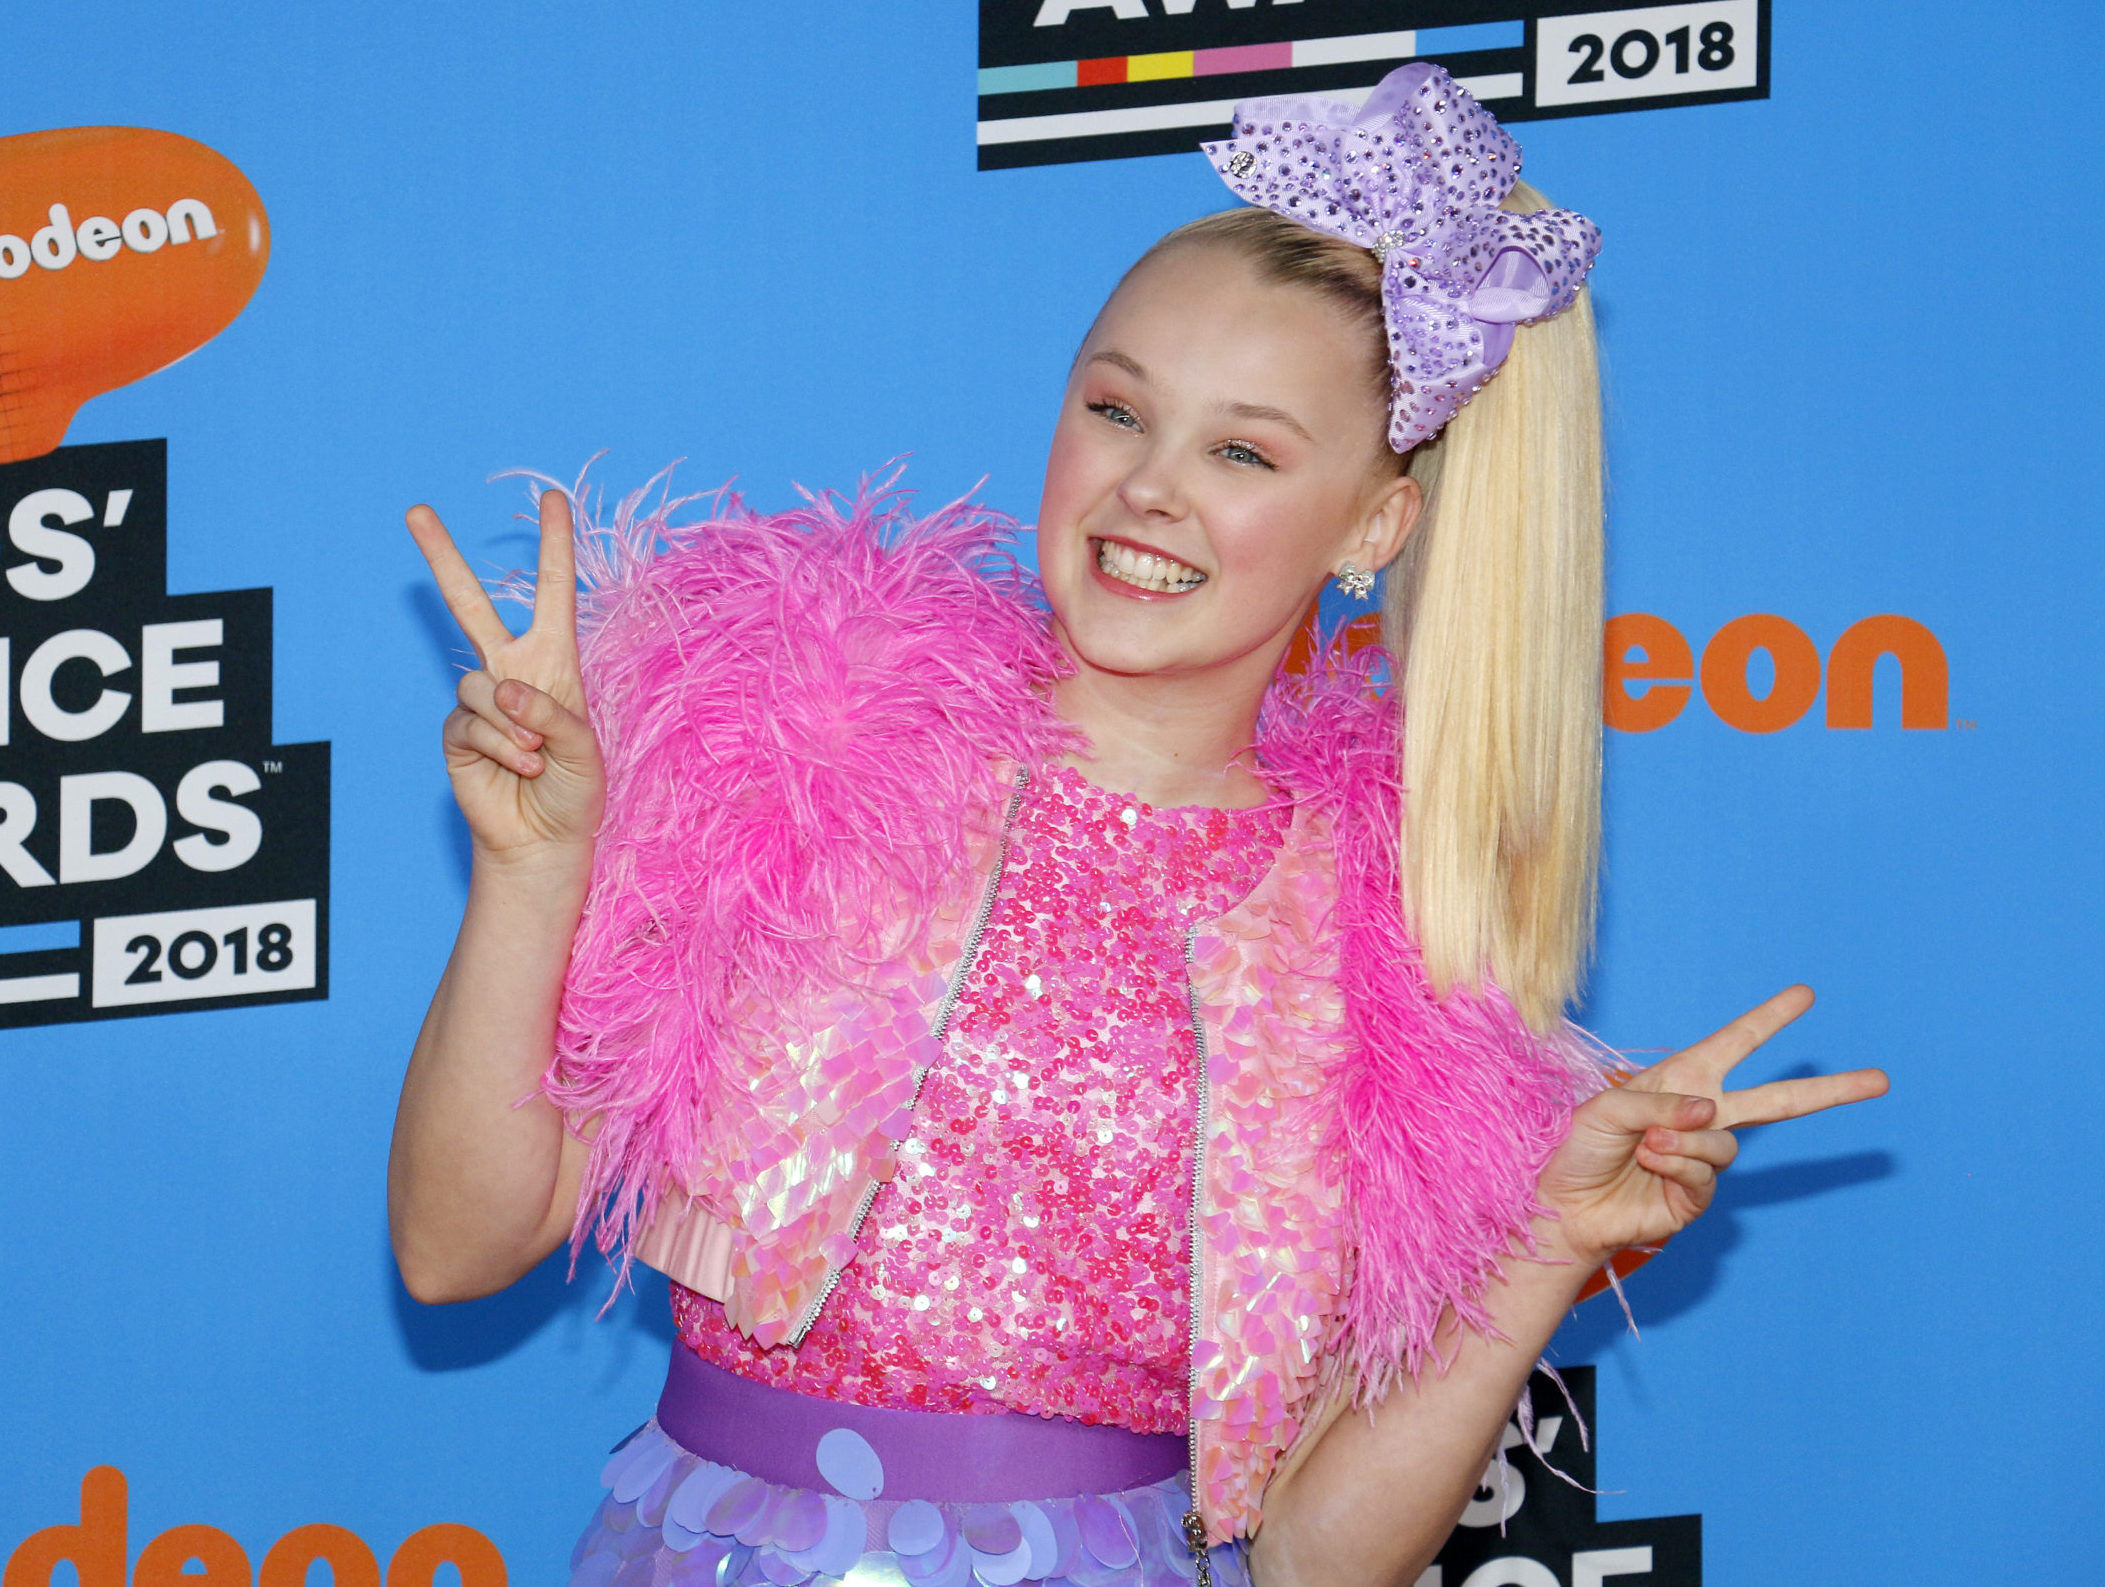 JoJo Siwa at the Nickelodeon's 2018 Kids' Choice Awards held at the Forum in Inglewood, USA on March 24, 2018.